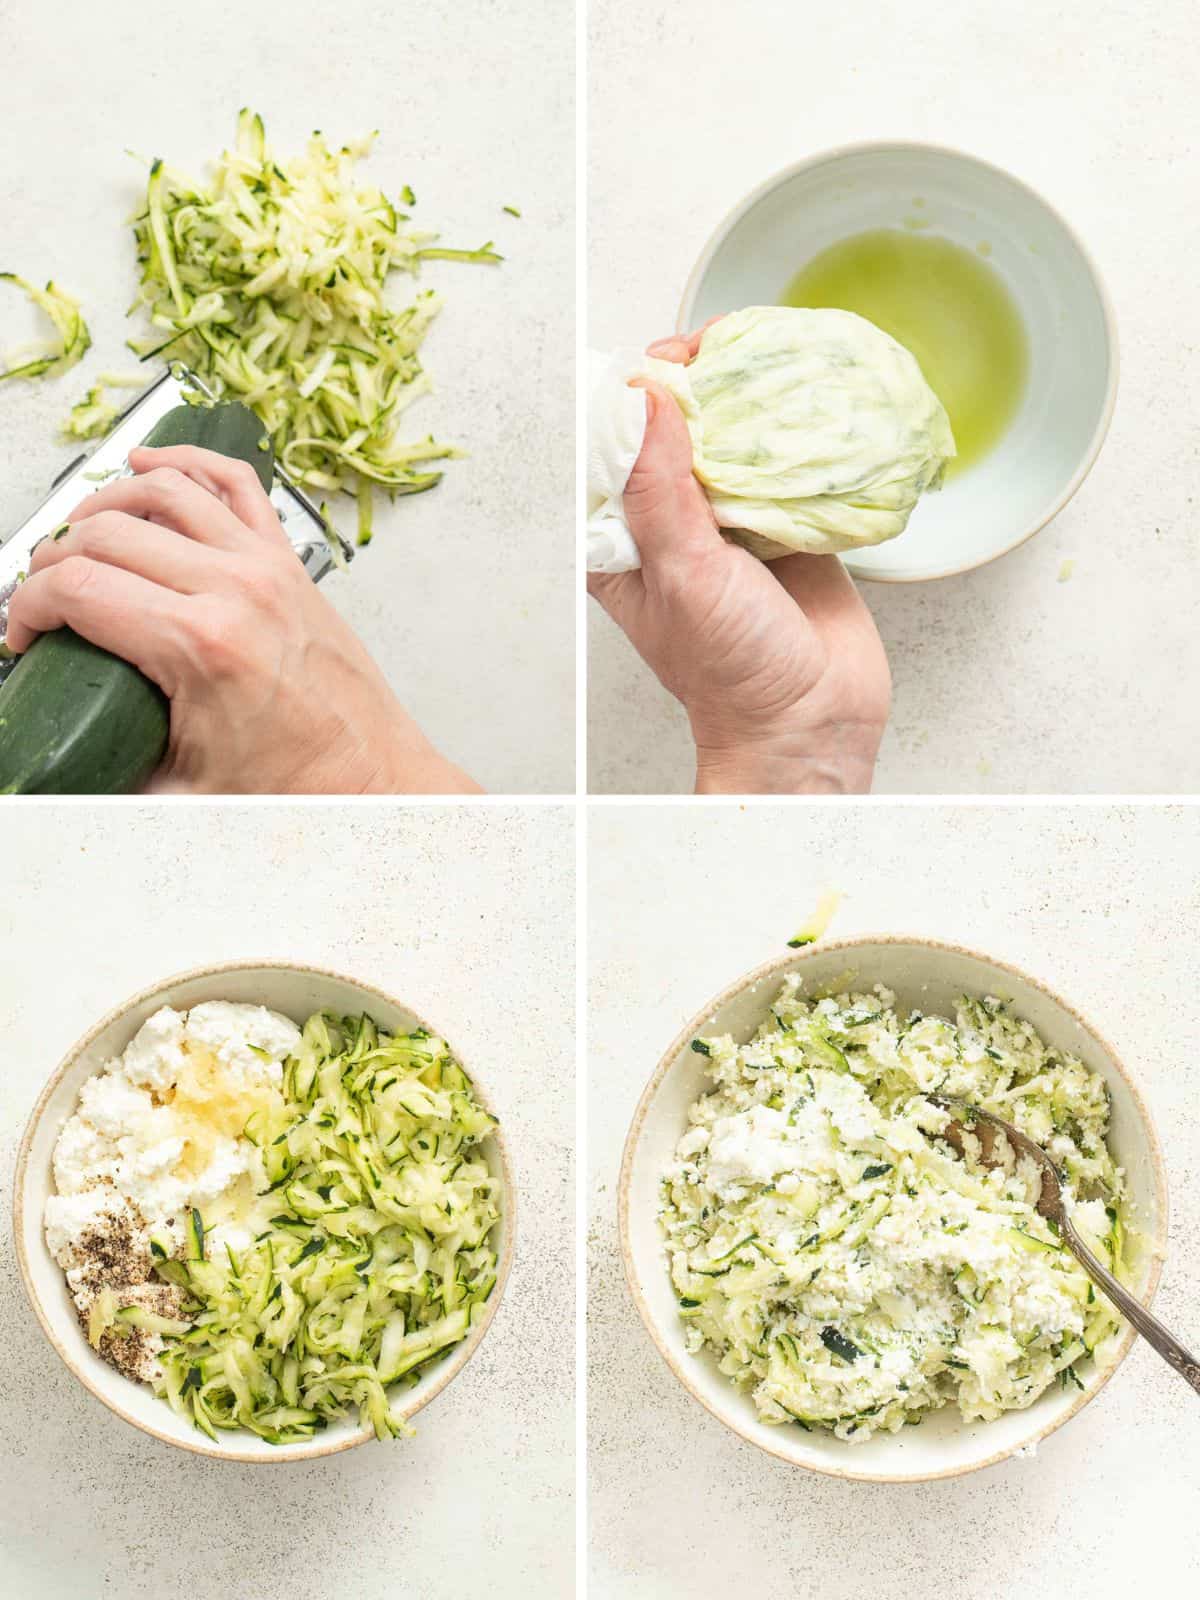 Process photos of how to grate zucchini and mix it with garlic and ricotta.